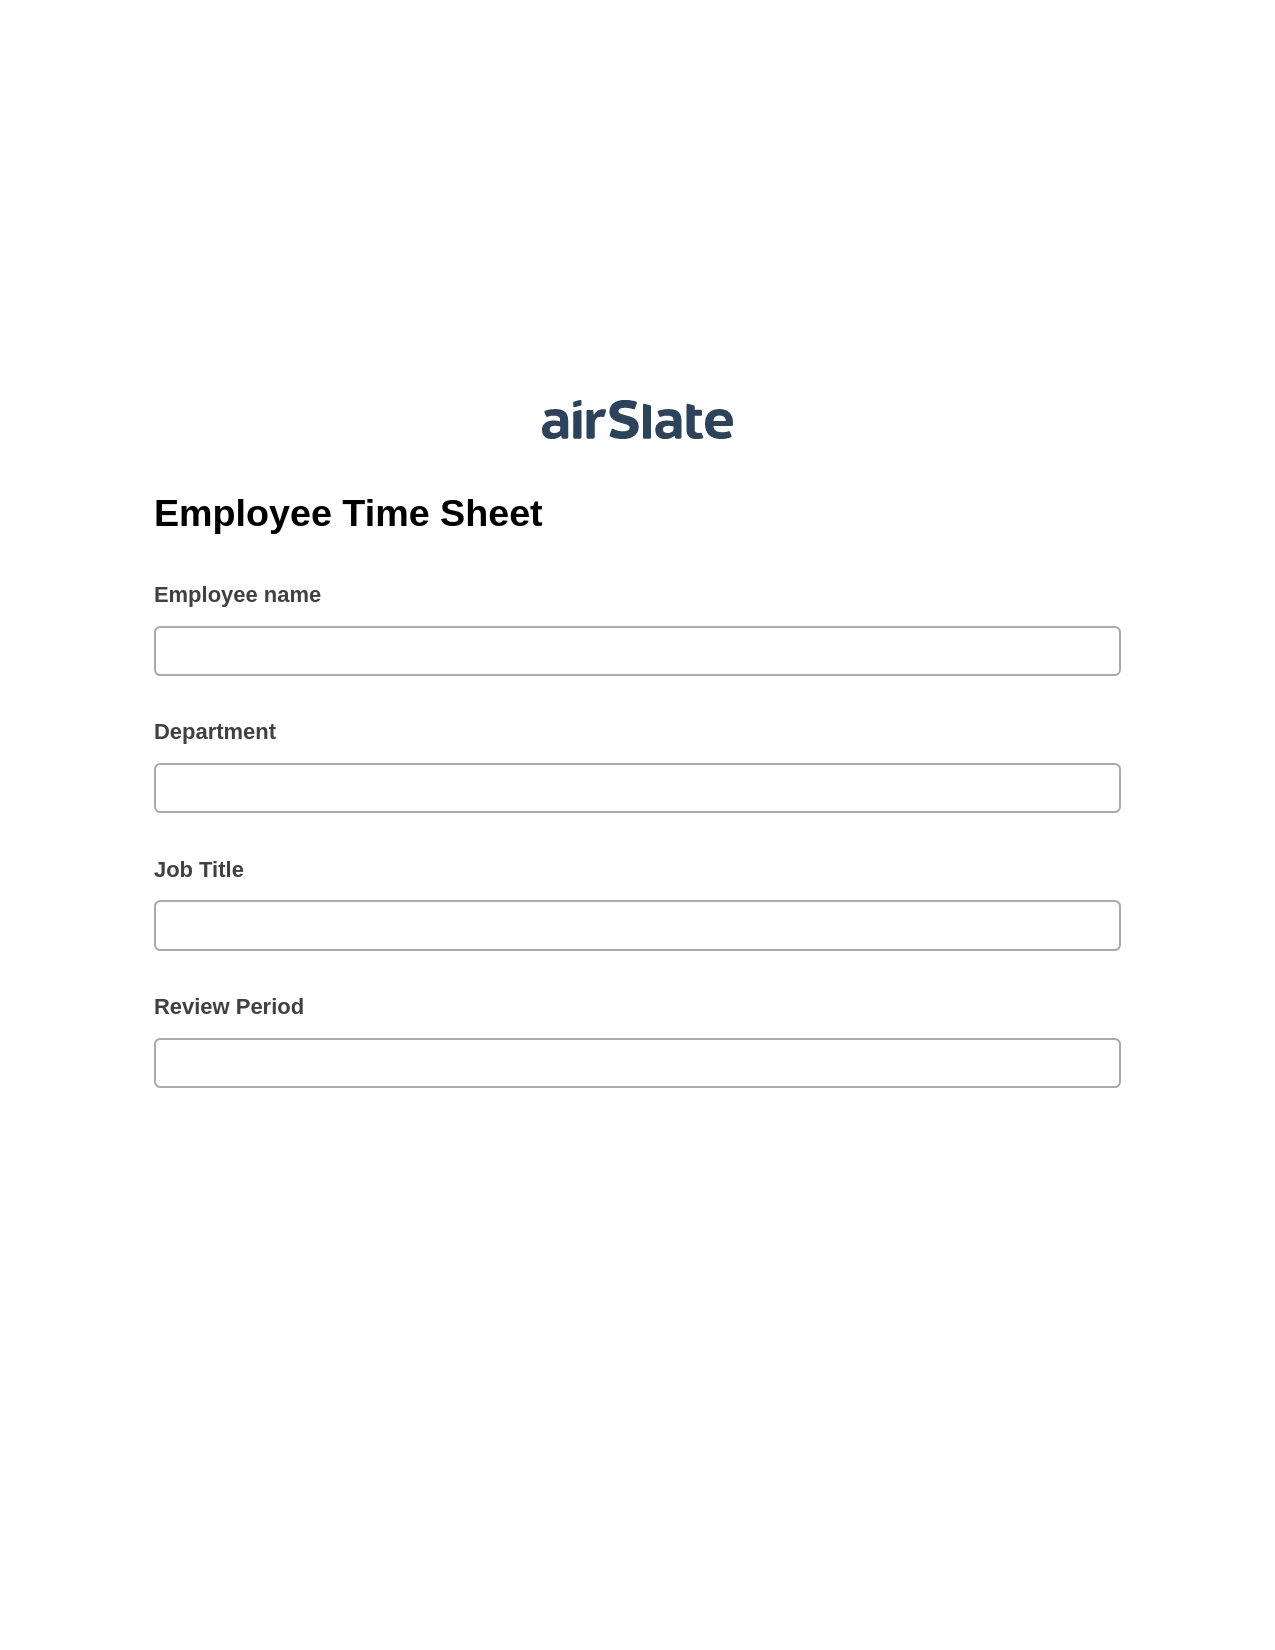 Employee Time Sheet Pre-fill from CSV File Bot, Create slate from another Flow Bot, Post-finish Document Bot